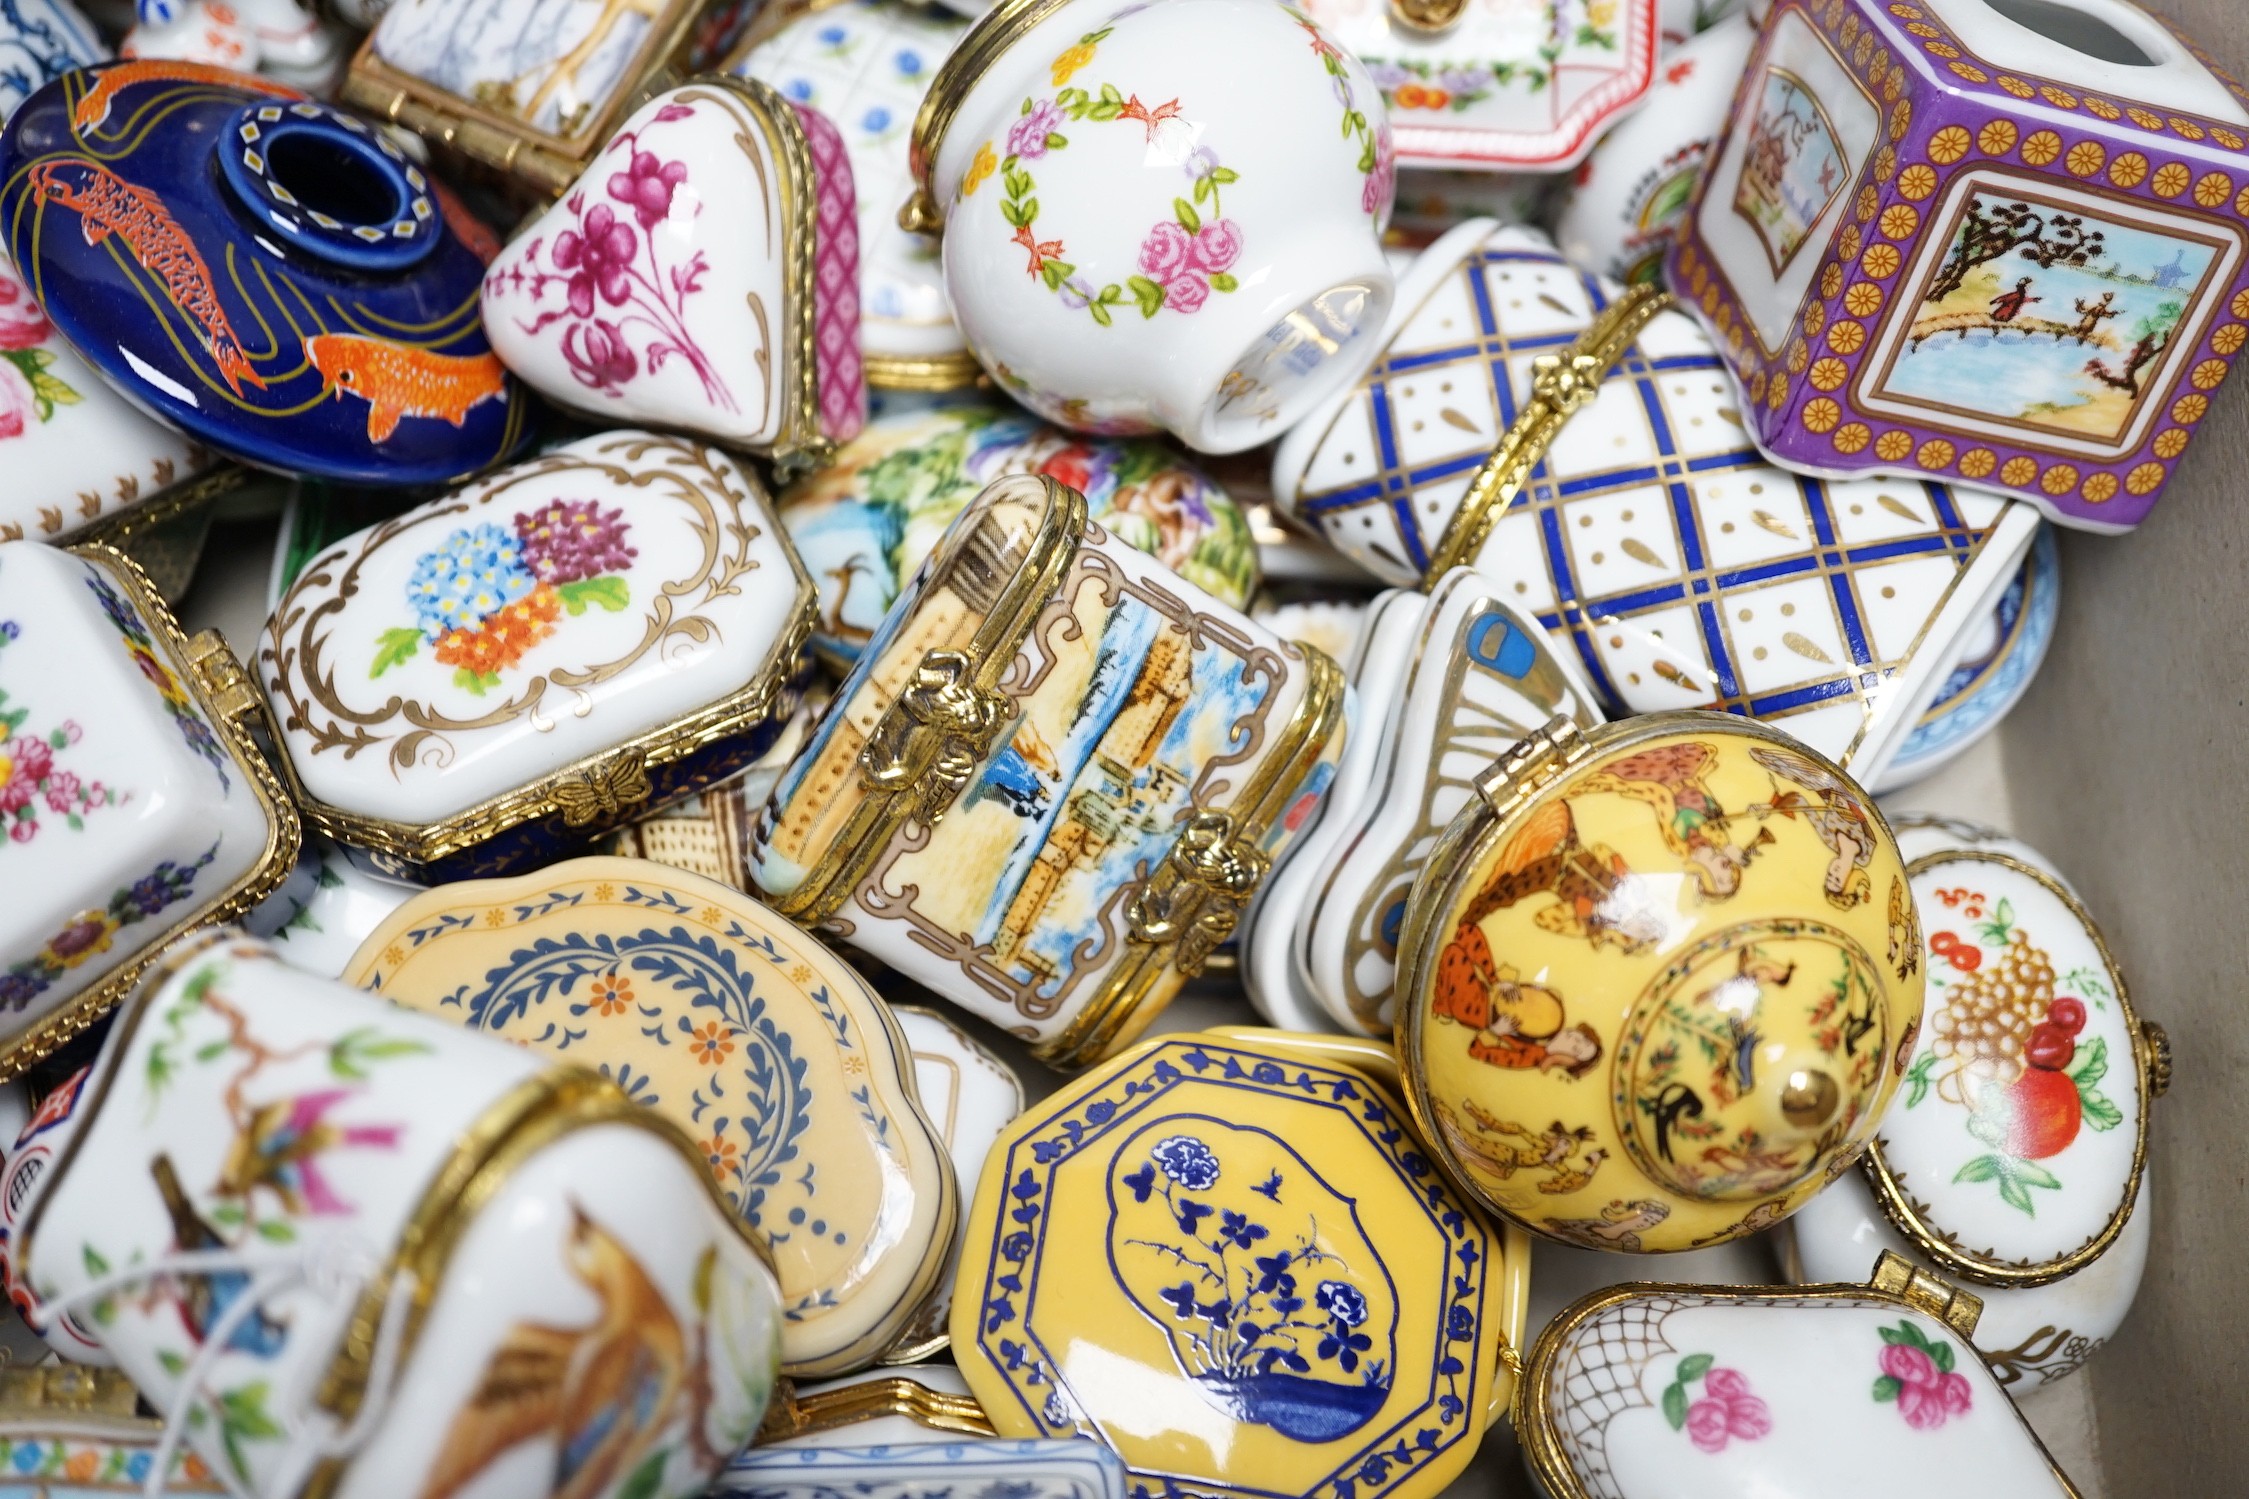 A quantity of approximately sixty Del Prado oriental and classic collection porcelain boxes, together with accompanying book and ephemera